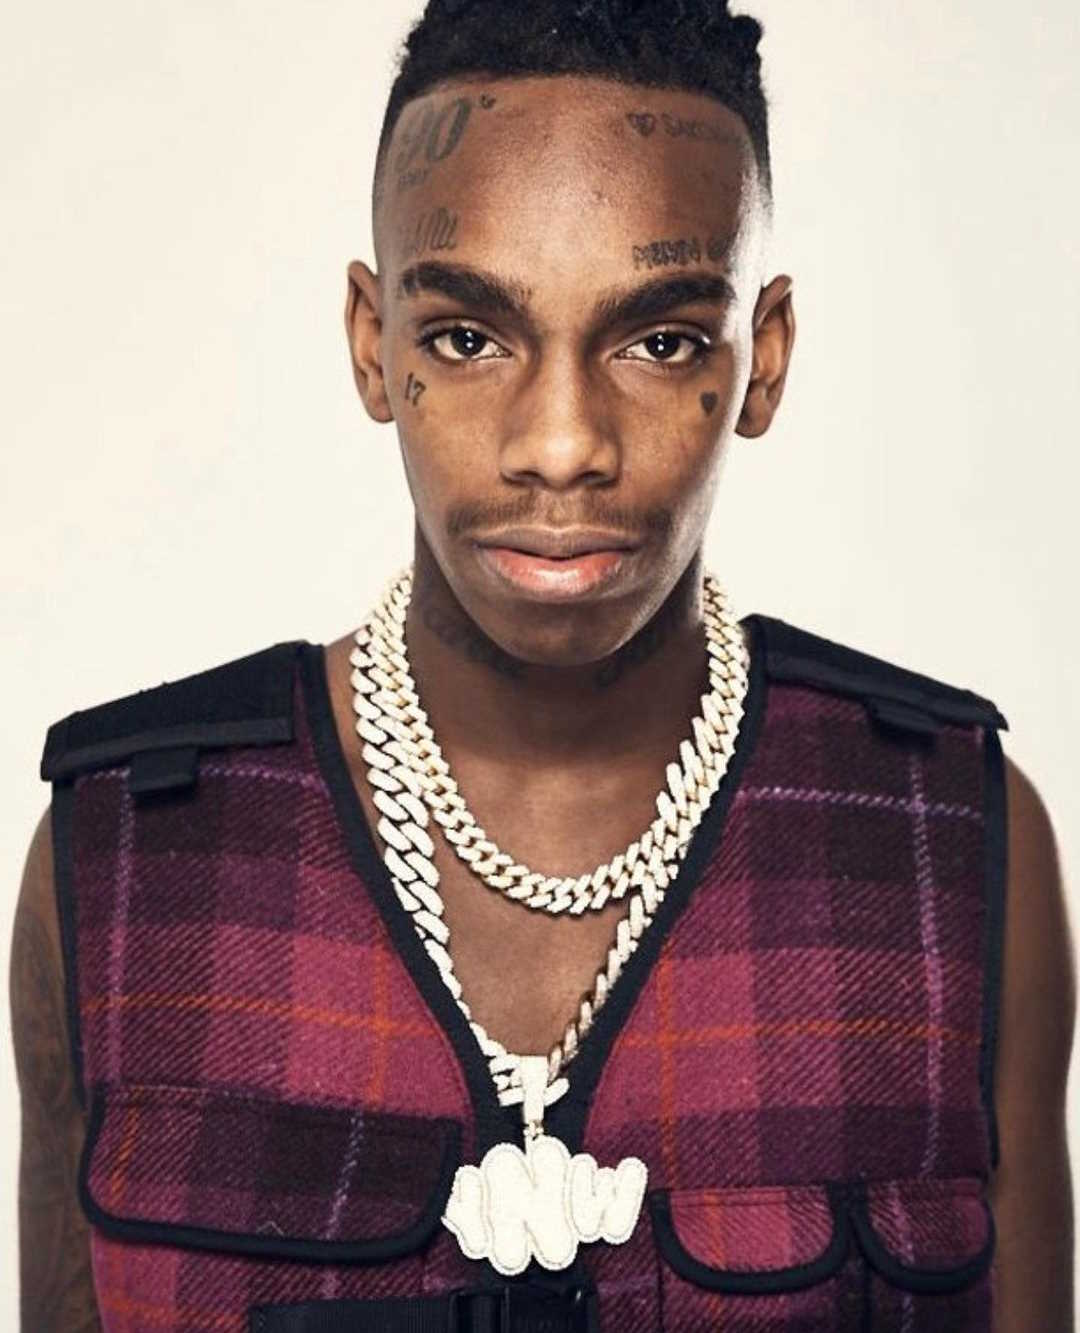 YNW Melly Biography (Age, Height, Weight, Girlfriend, Family, Career & More)